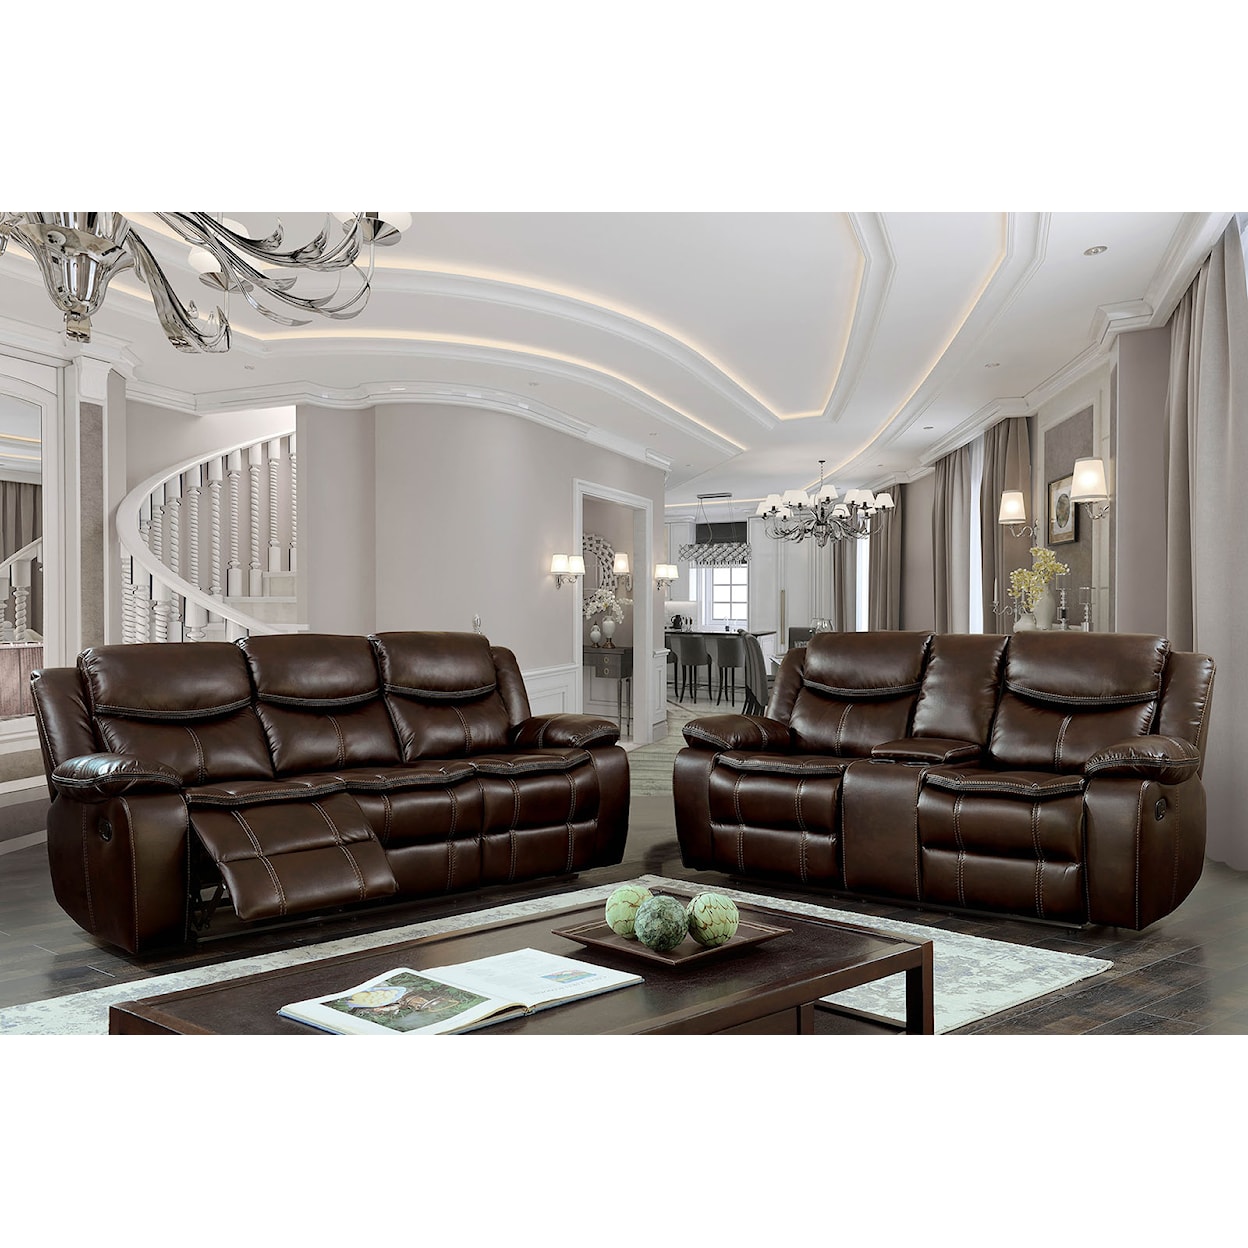 Furniture of America Pollux 3-Piece Living Room Set